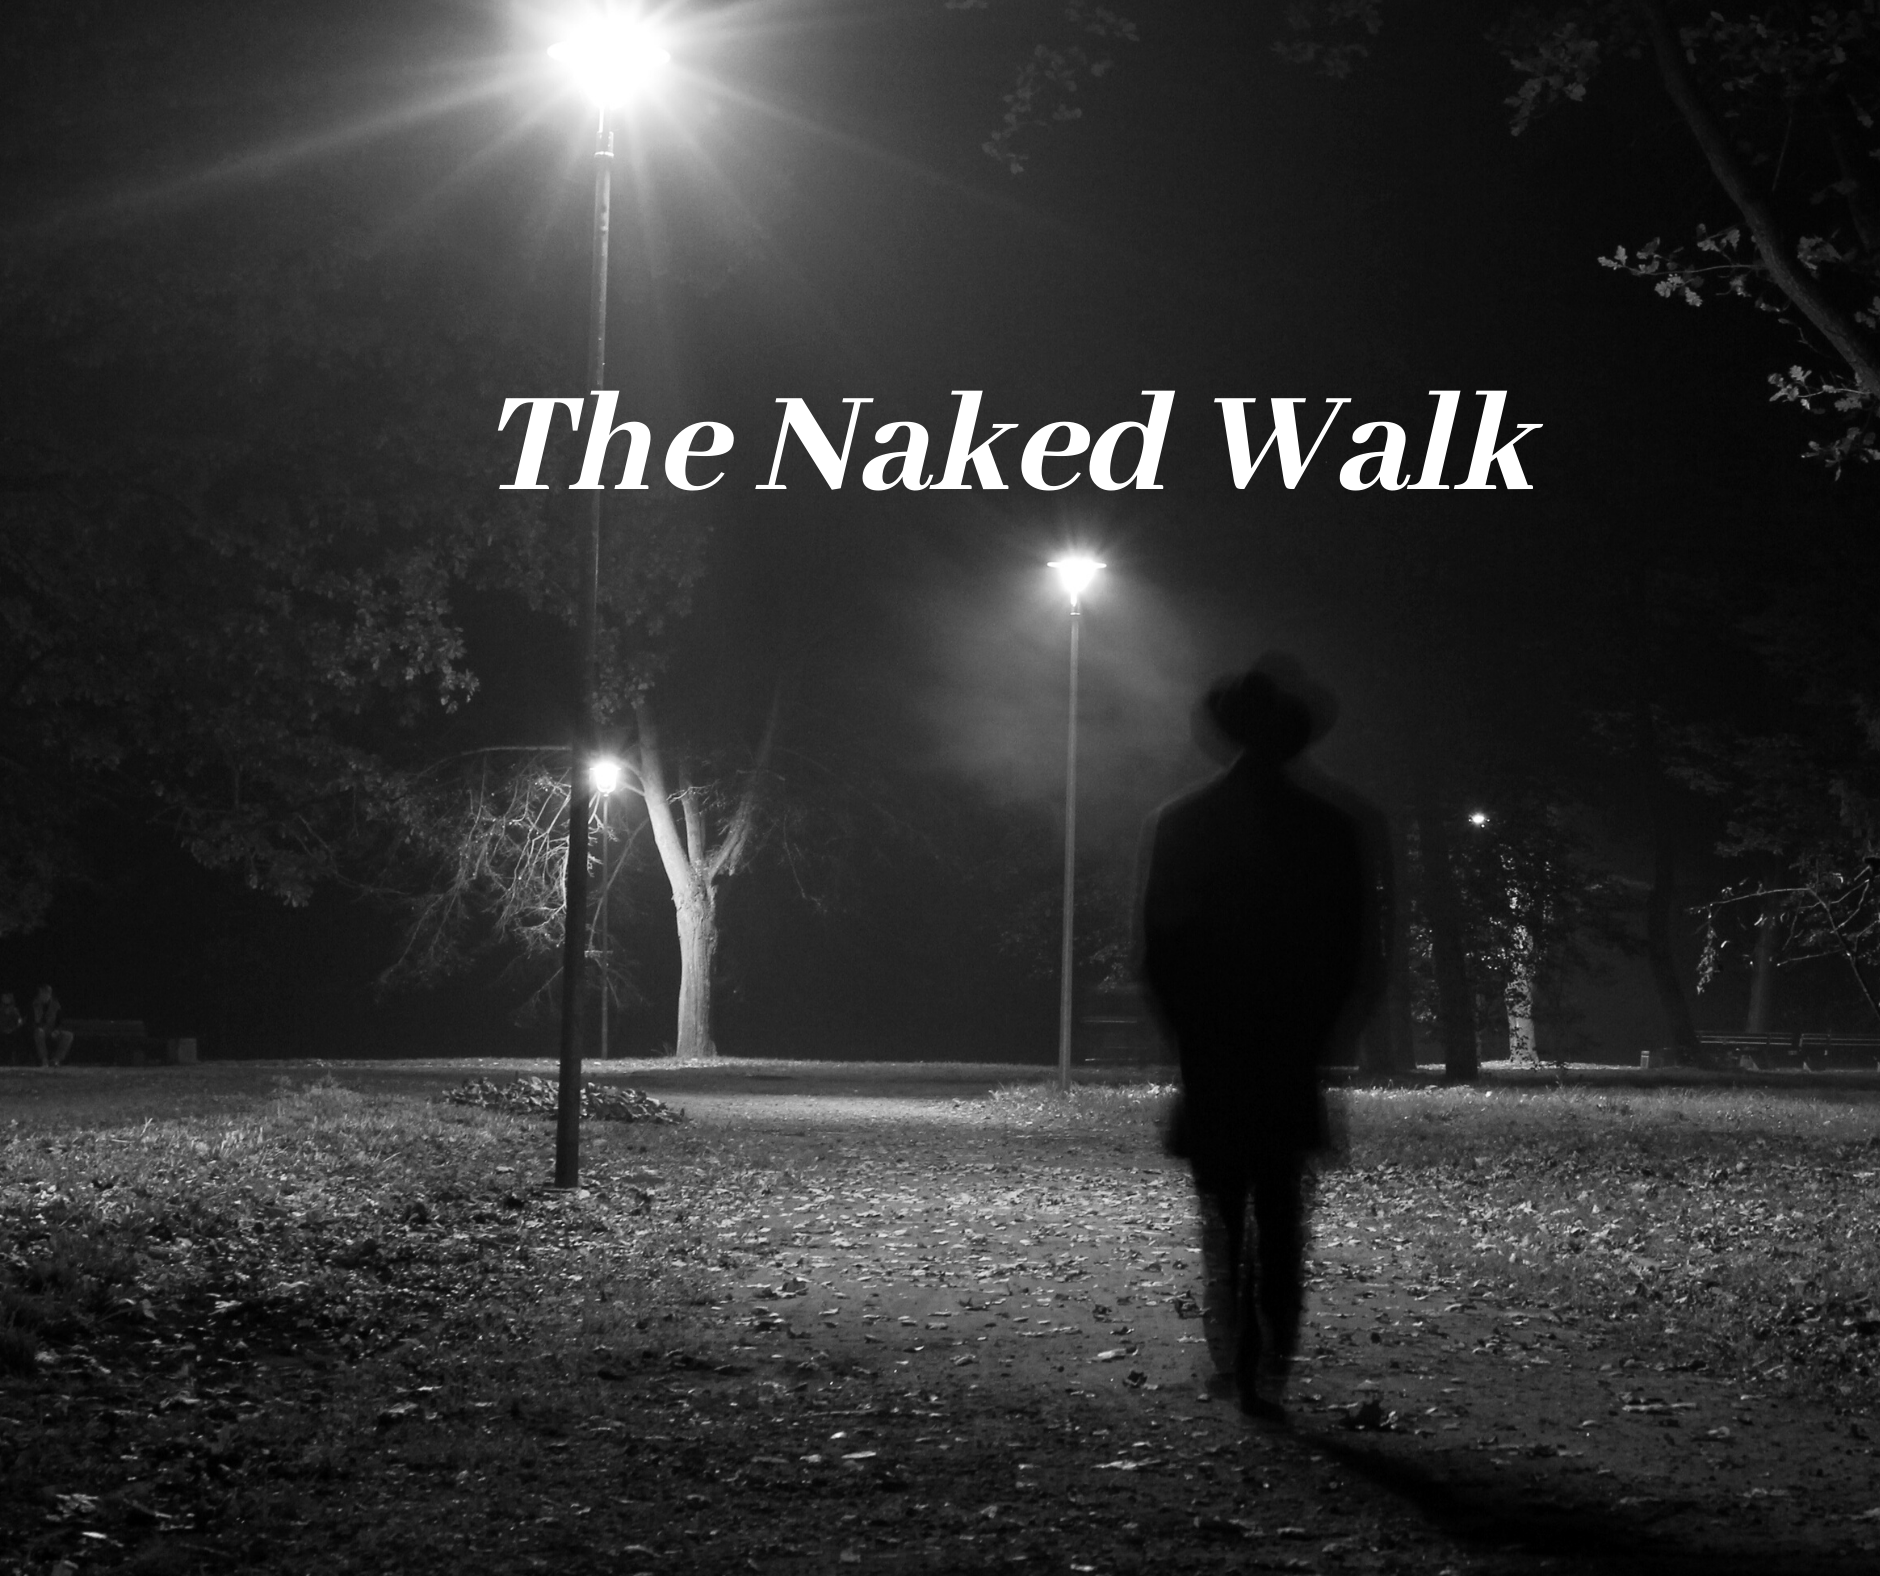 andrew gullen recommends Walking Naked At Night